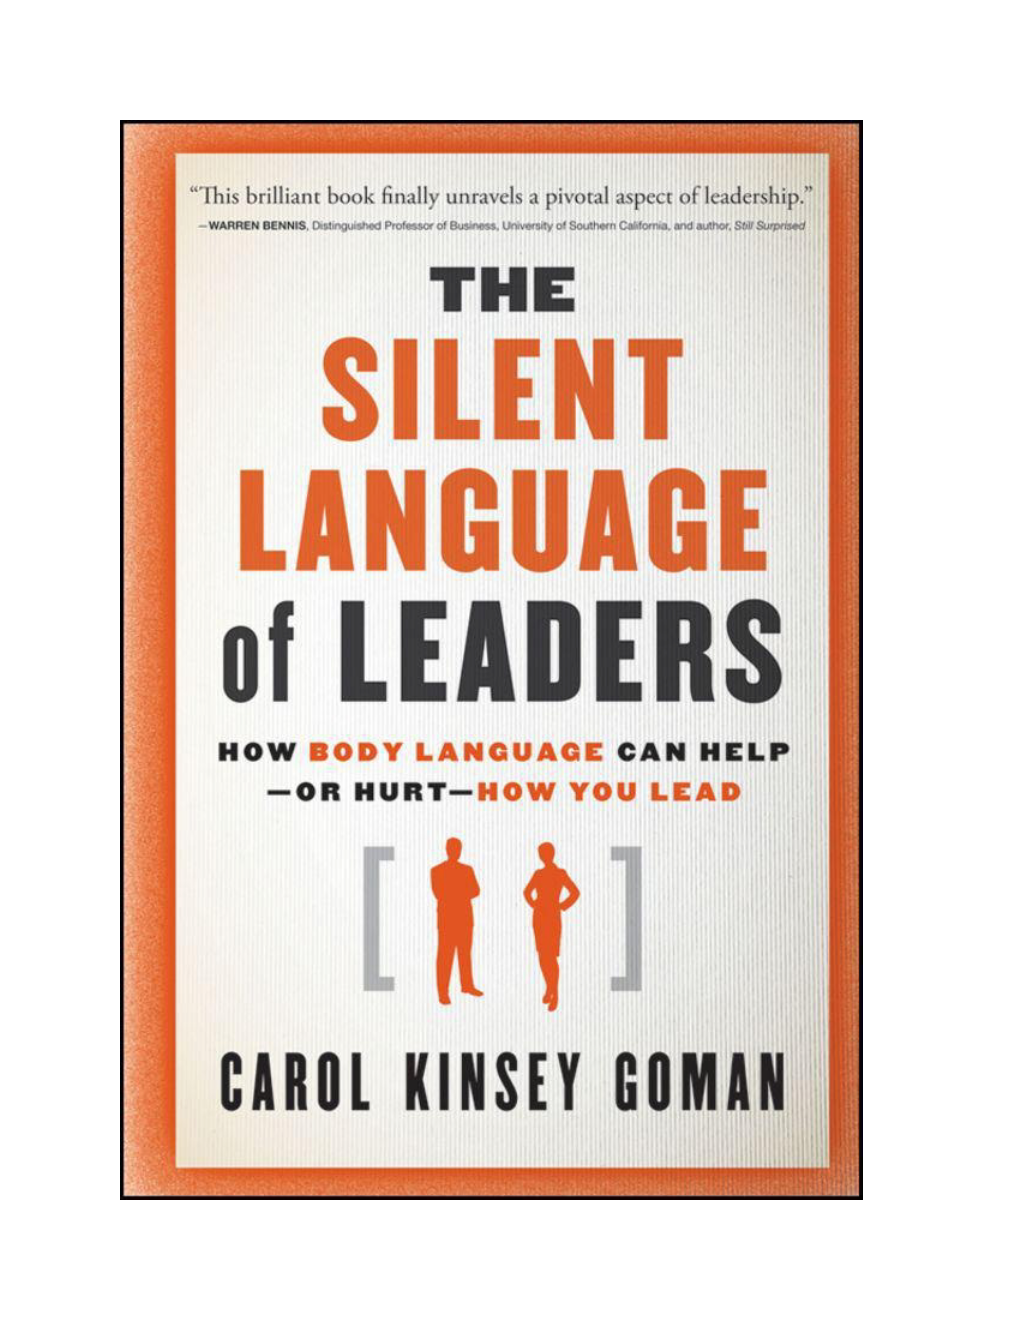 How Body Language Can Help--Or Hurt--How You Lead